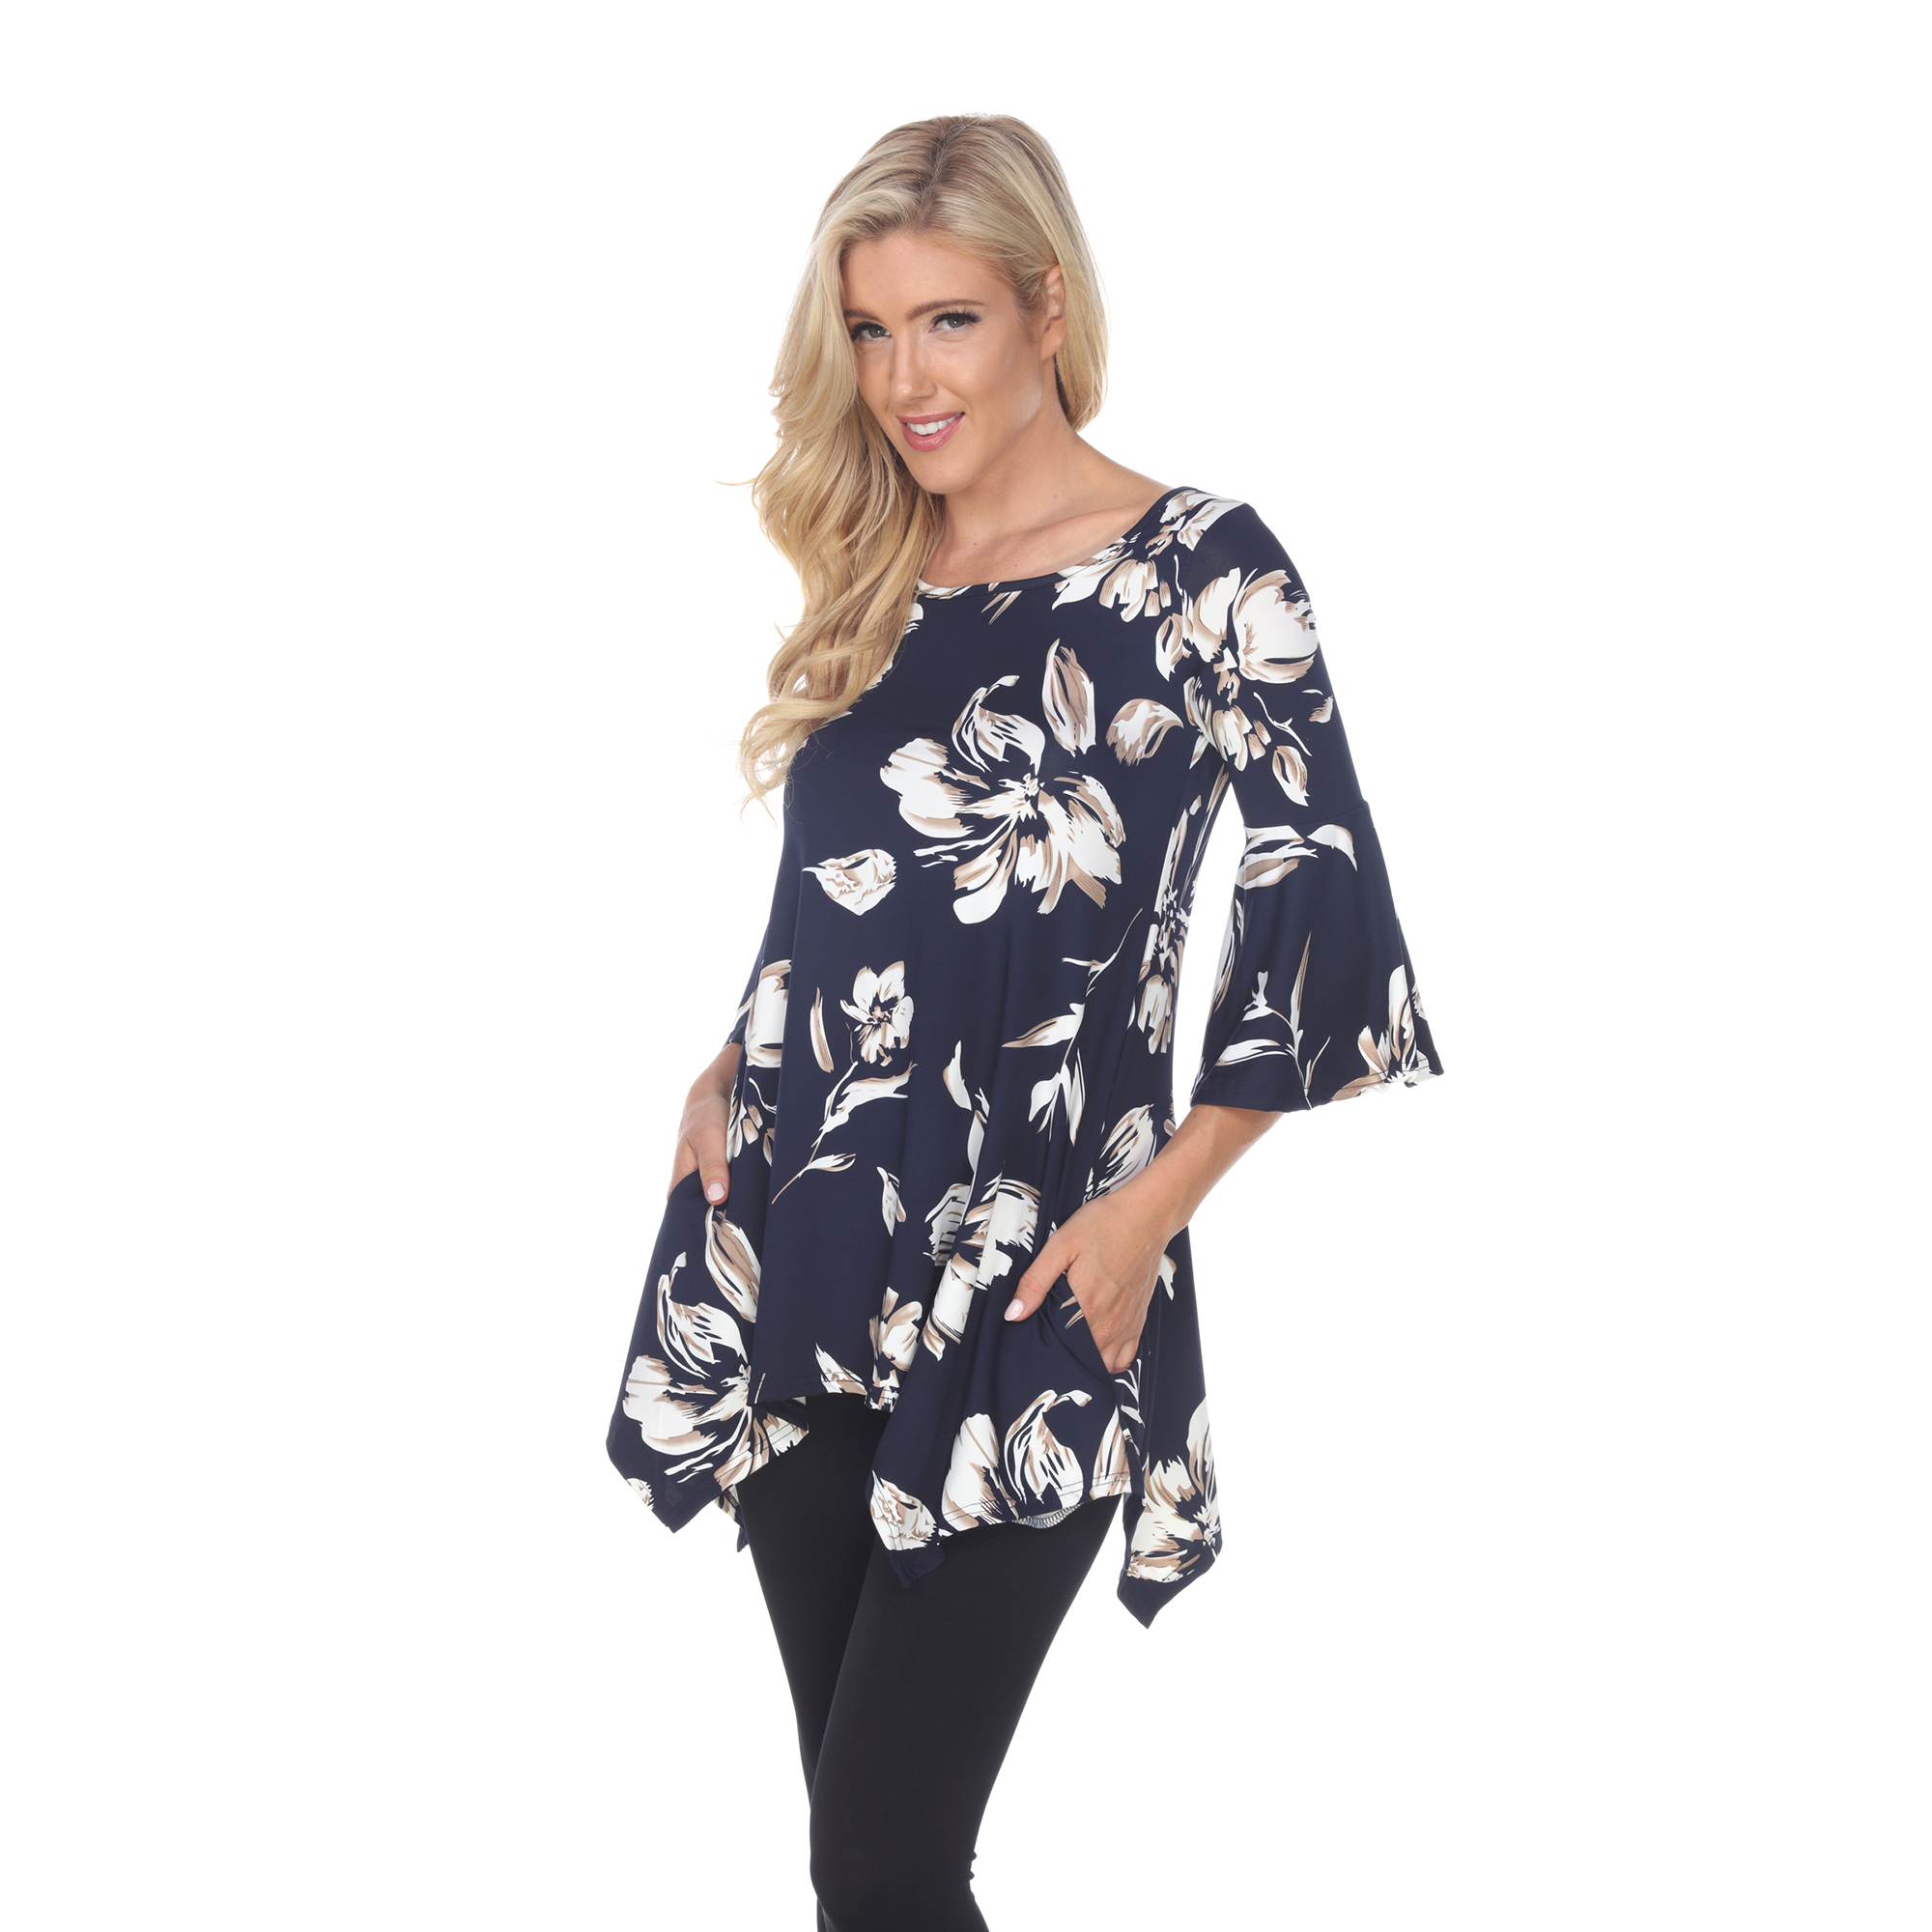 White Mark Women's Floral Print Quarter Sleeve Tunic Top With Pockets - Navy, Small